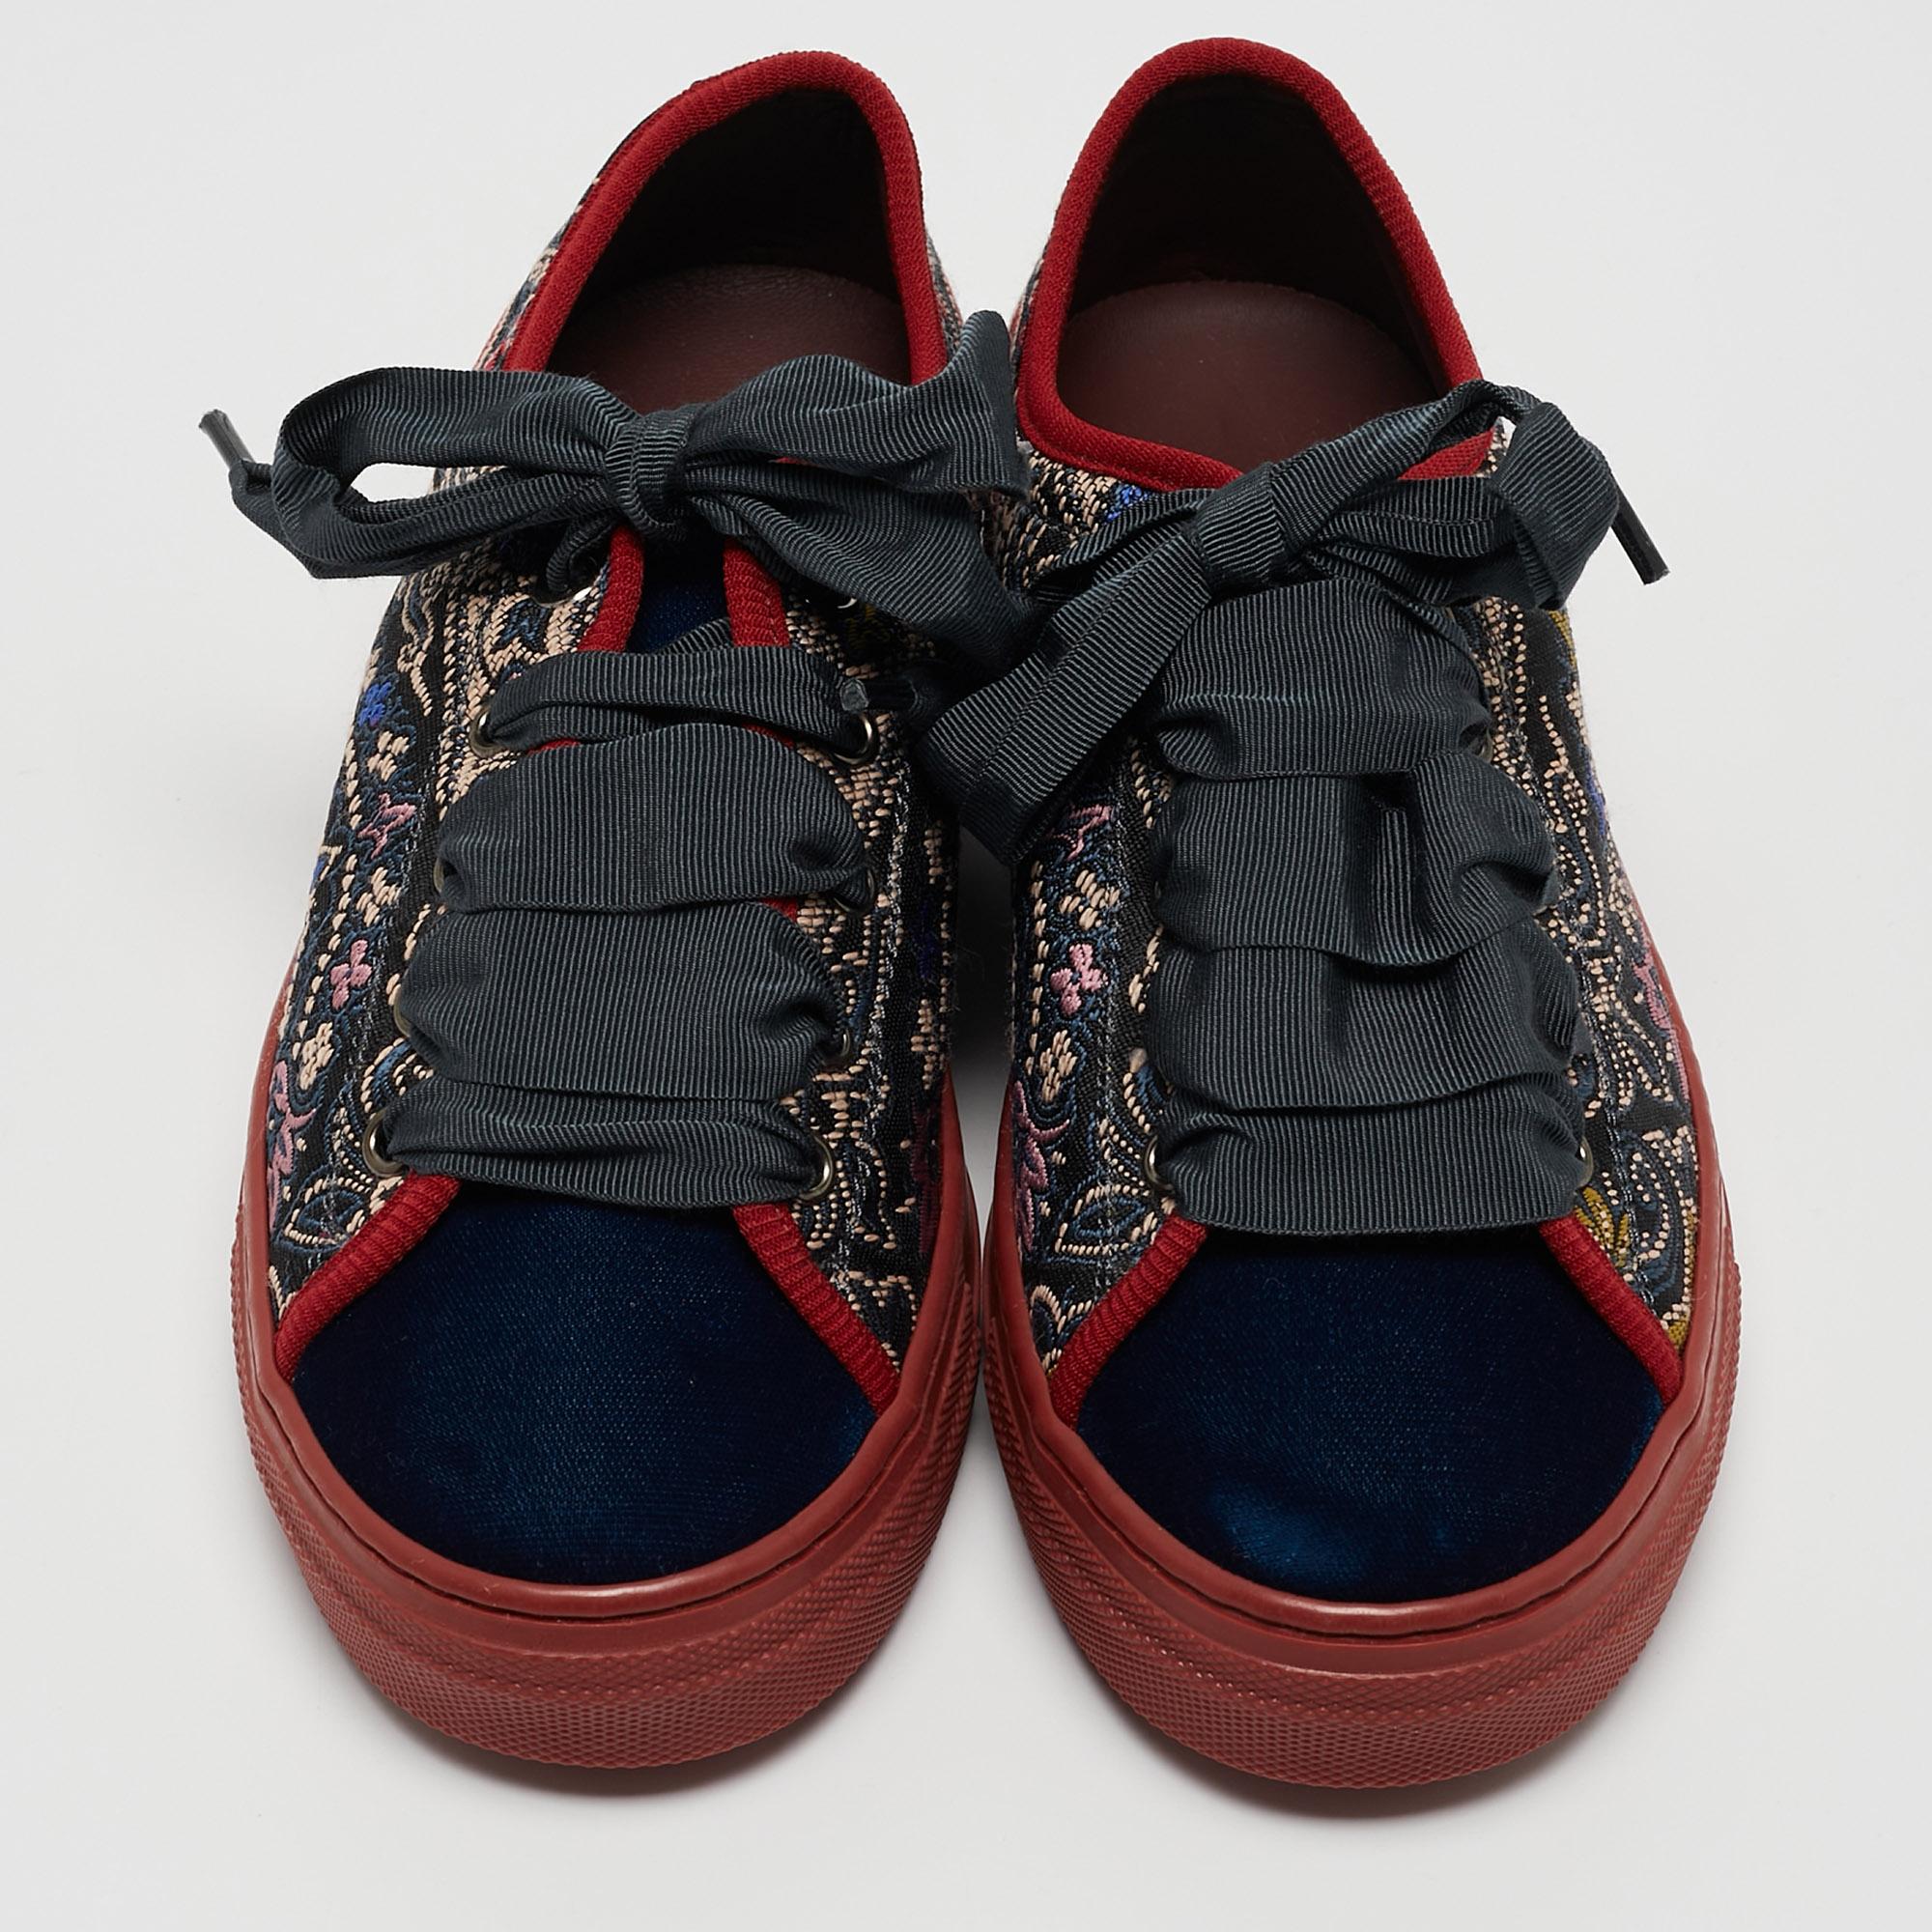 Etro Multicolor Embroidered Fabric and Velvet Low Top Sneakers Size 36 4